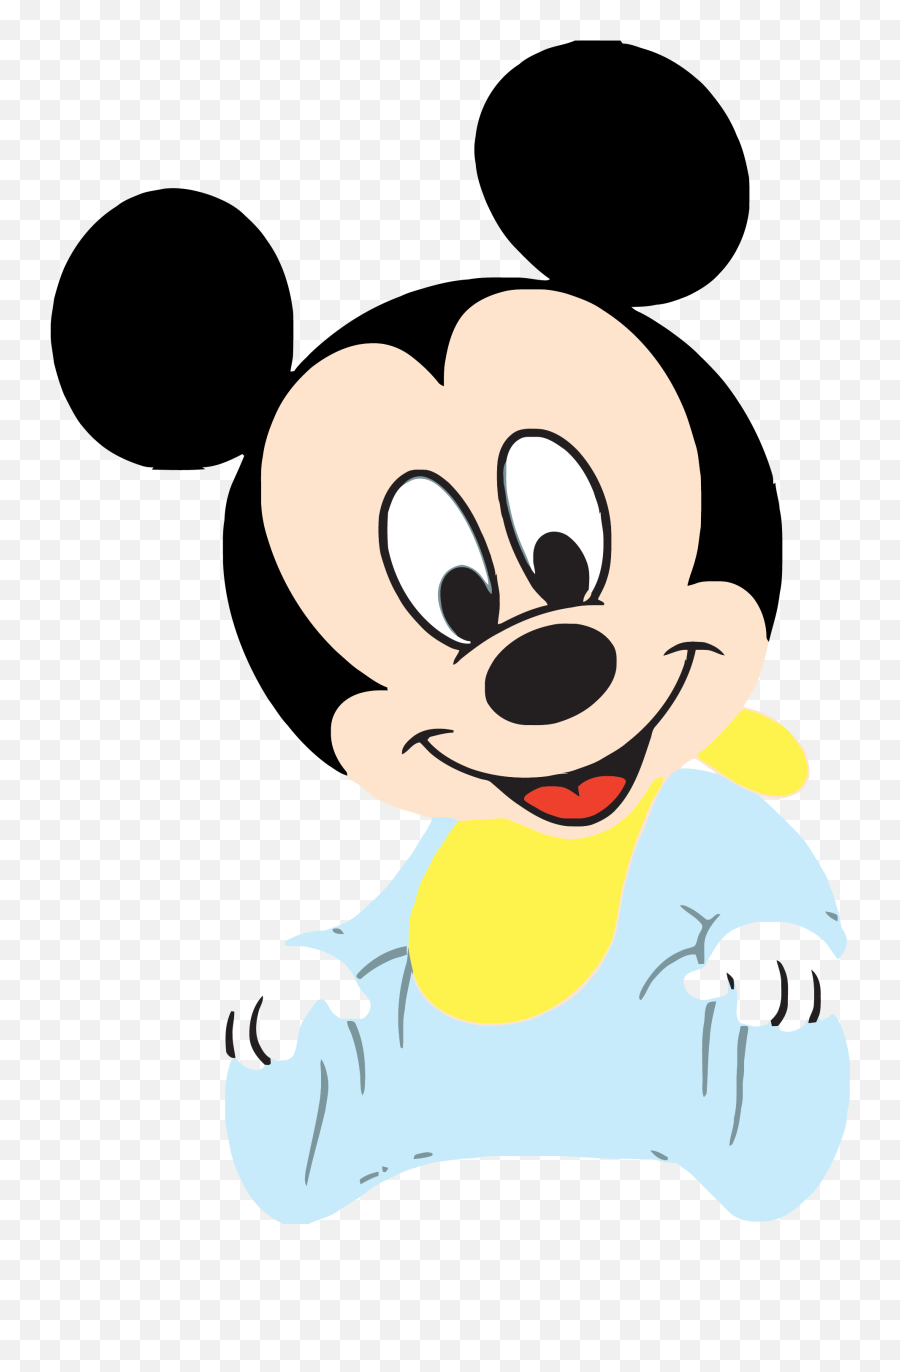 Mickey Mouse Minnie Mouse Khuyn M I Party Infant - Mickey Baby Minnie Mouse Family Emoji,Mickey And Minnie Disney Emojis